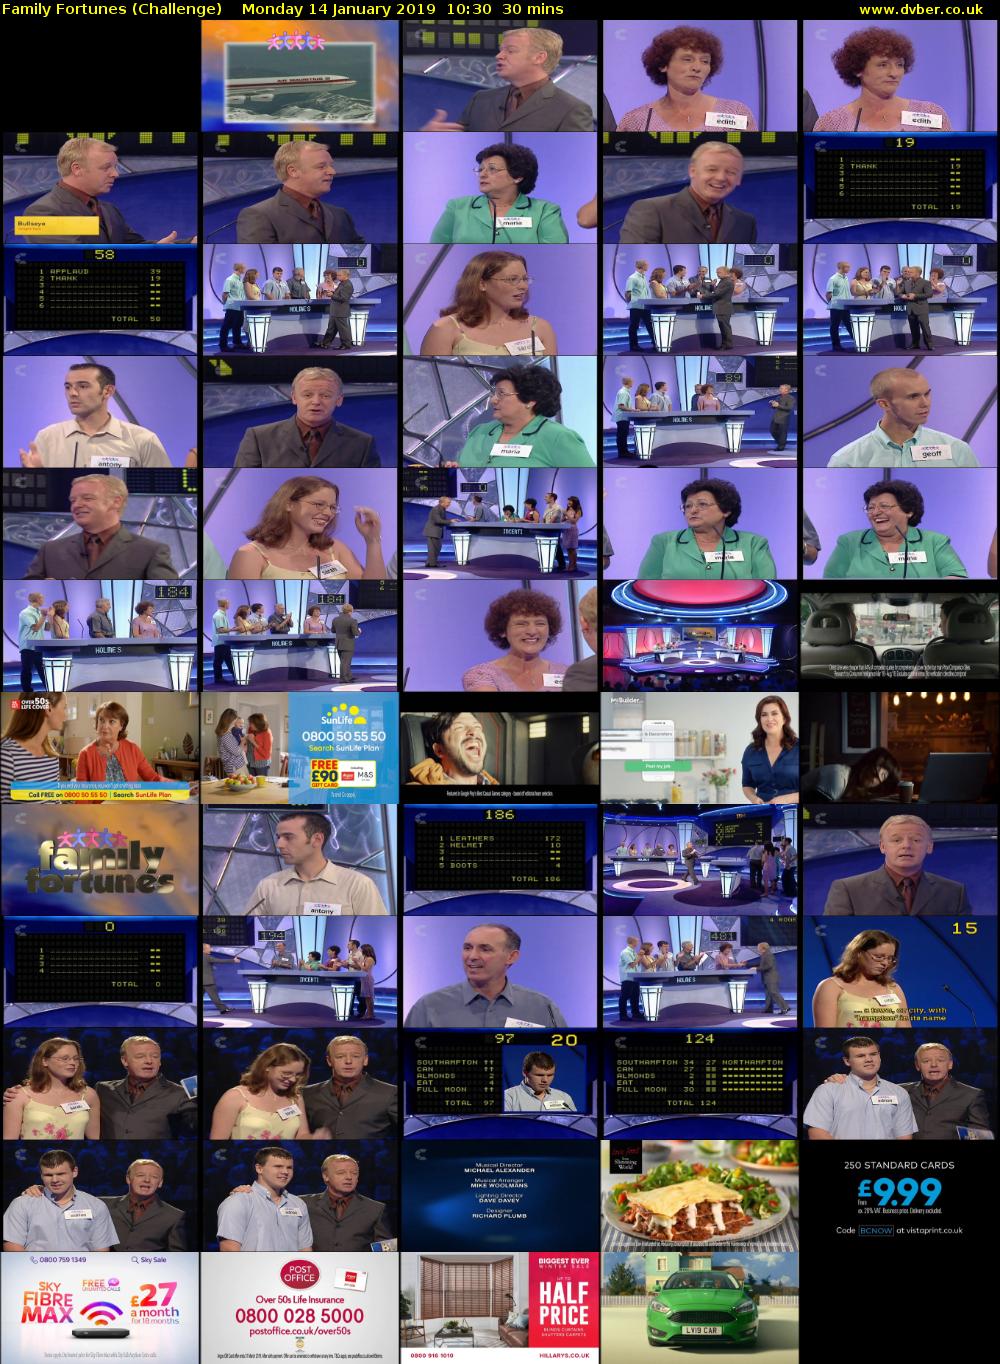 Family Fortunes (Challenge) Monday 14 January 2019 10:30 - 11:00